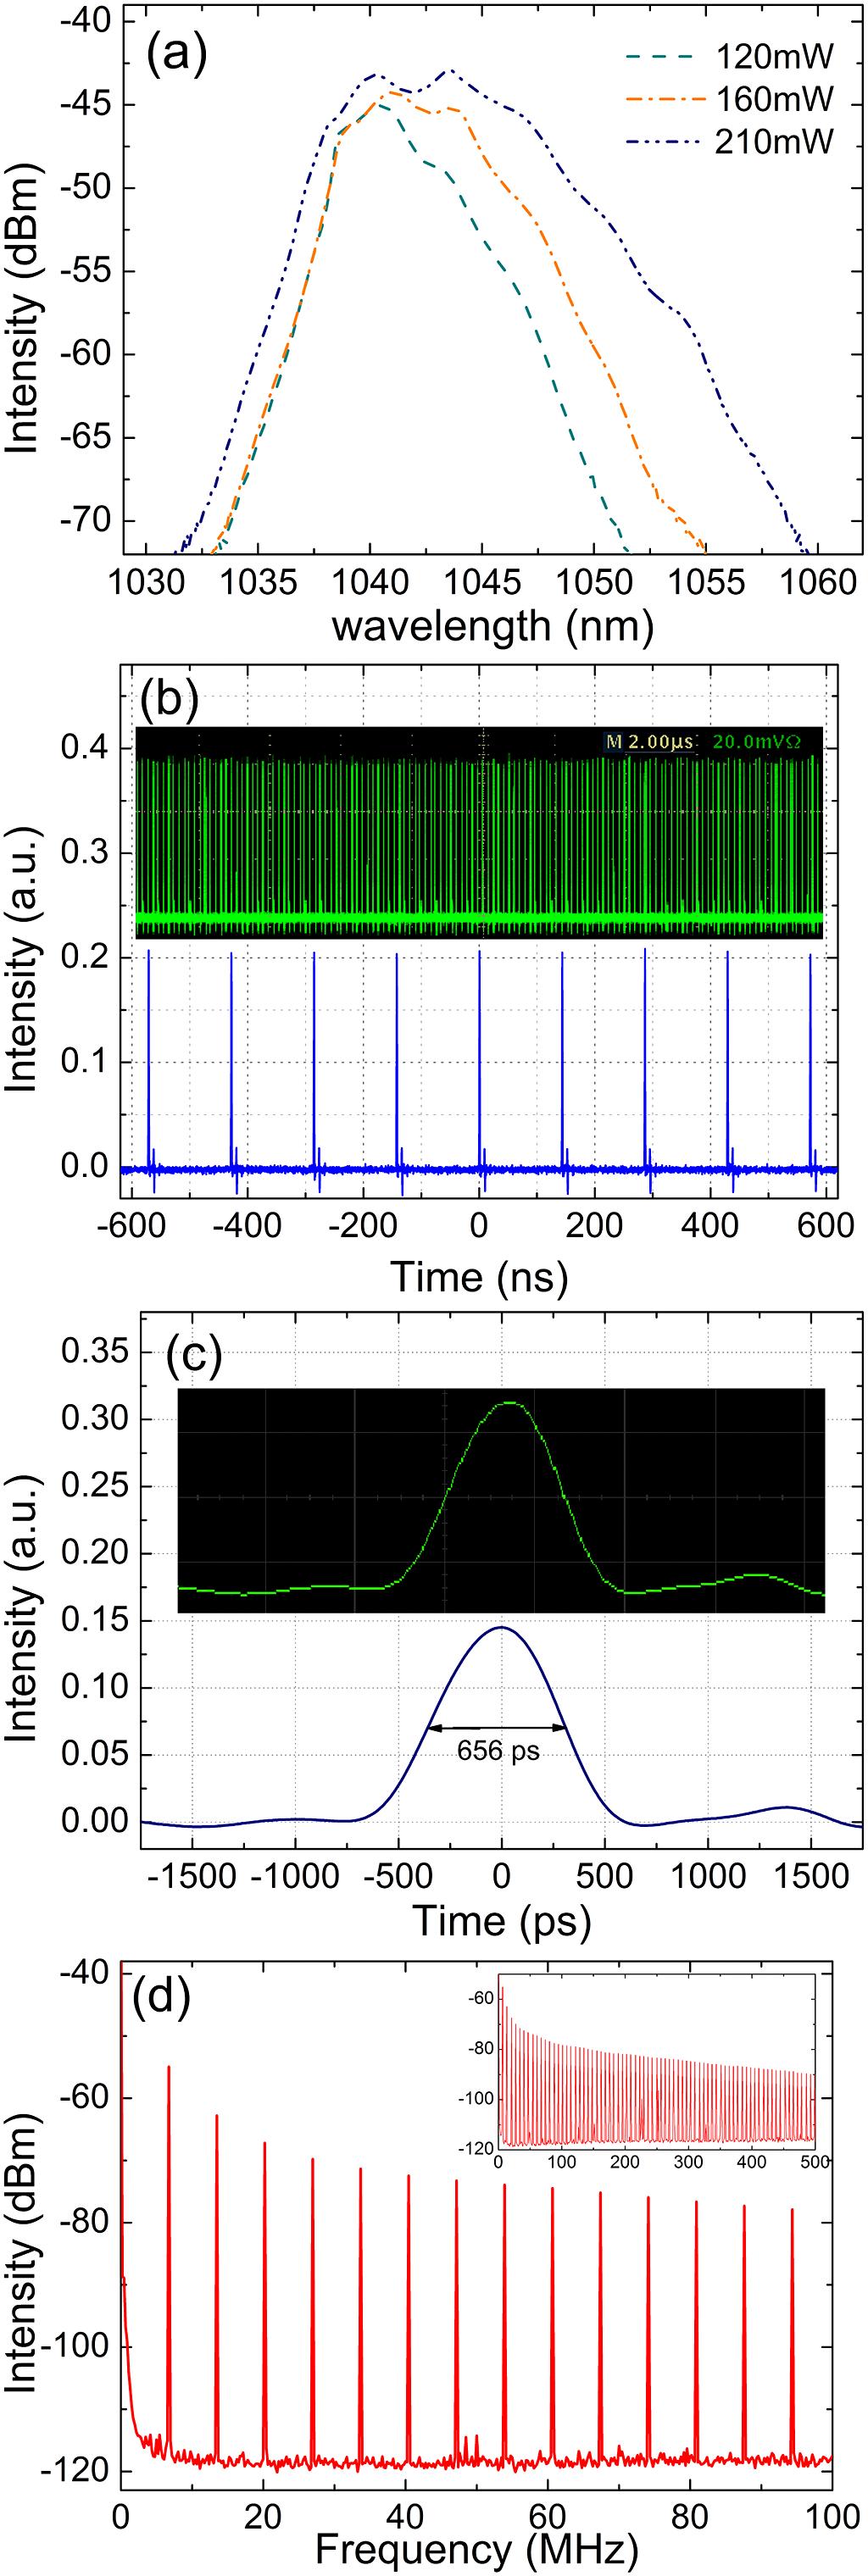 Figure 4 The relation between the input pump power and output power. Fig. 3 (a). The optical spectra broaden with the increase of the pump power.